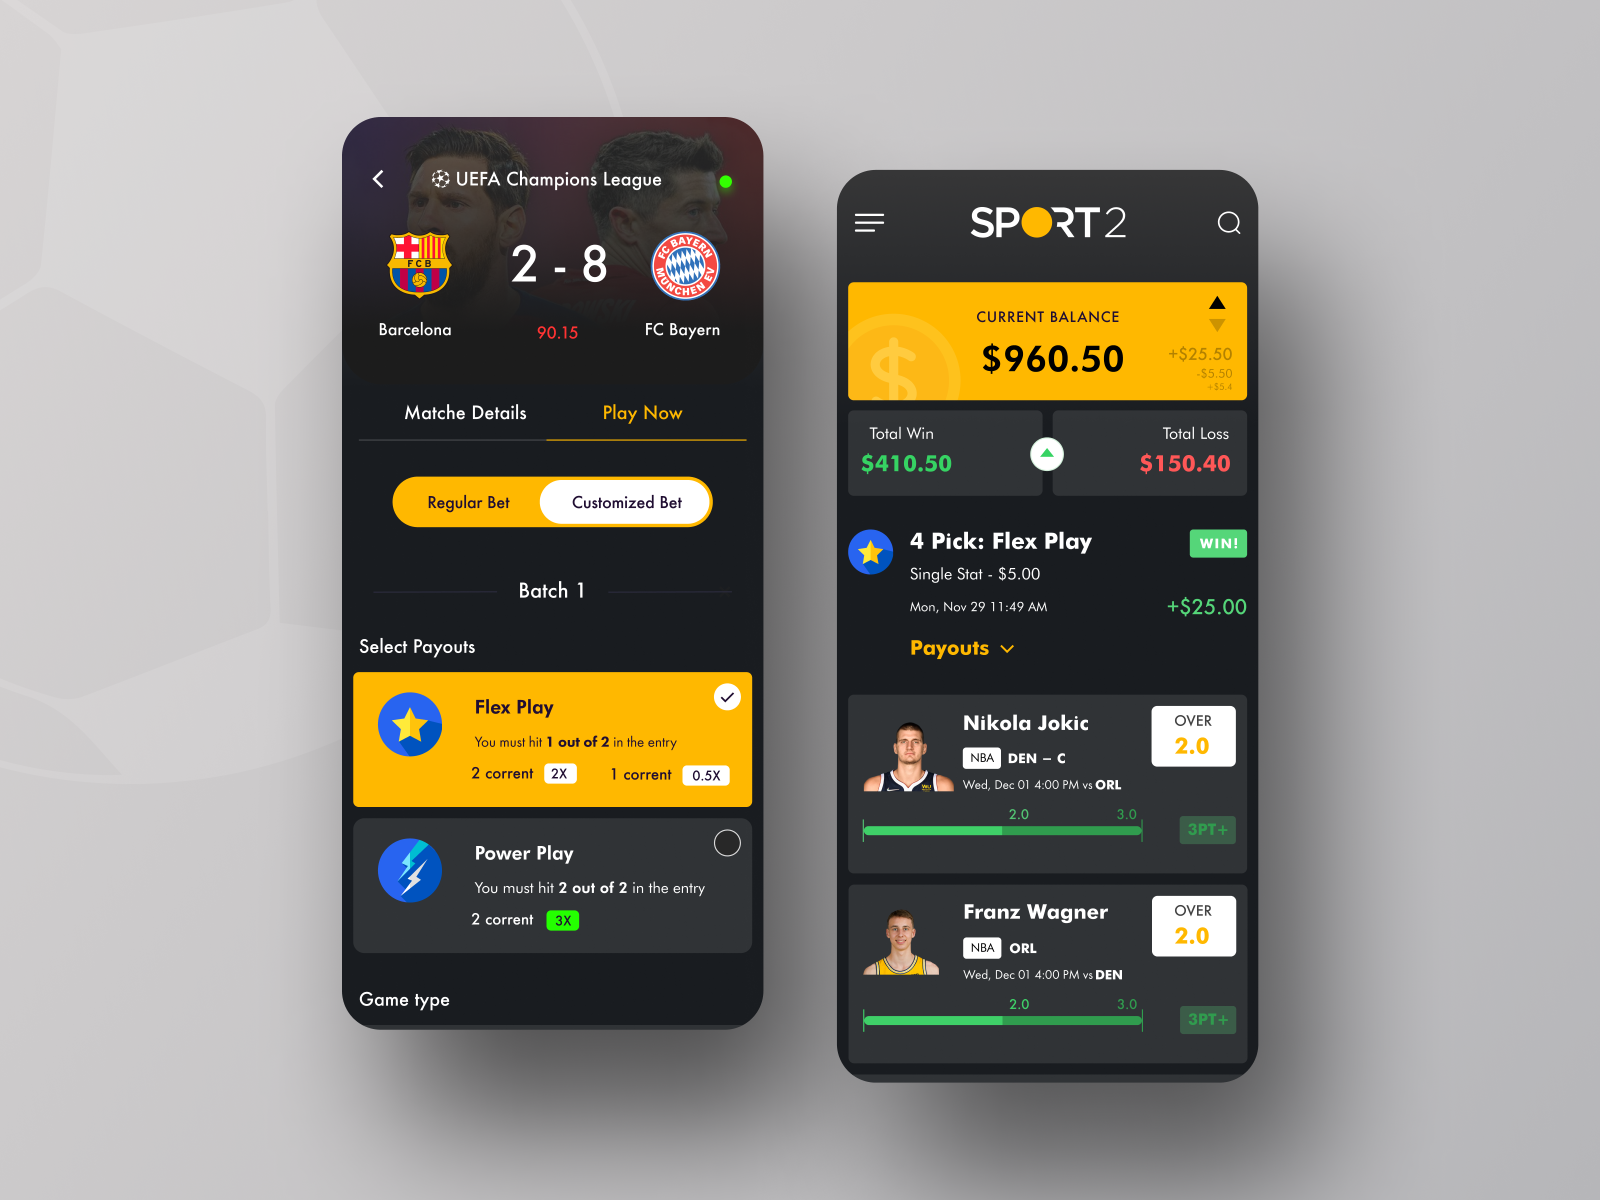 Here Is A Quick Cure For best app for IPL betting